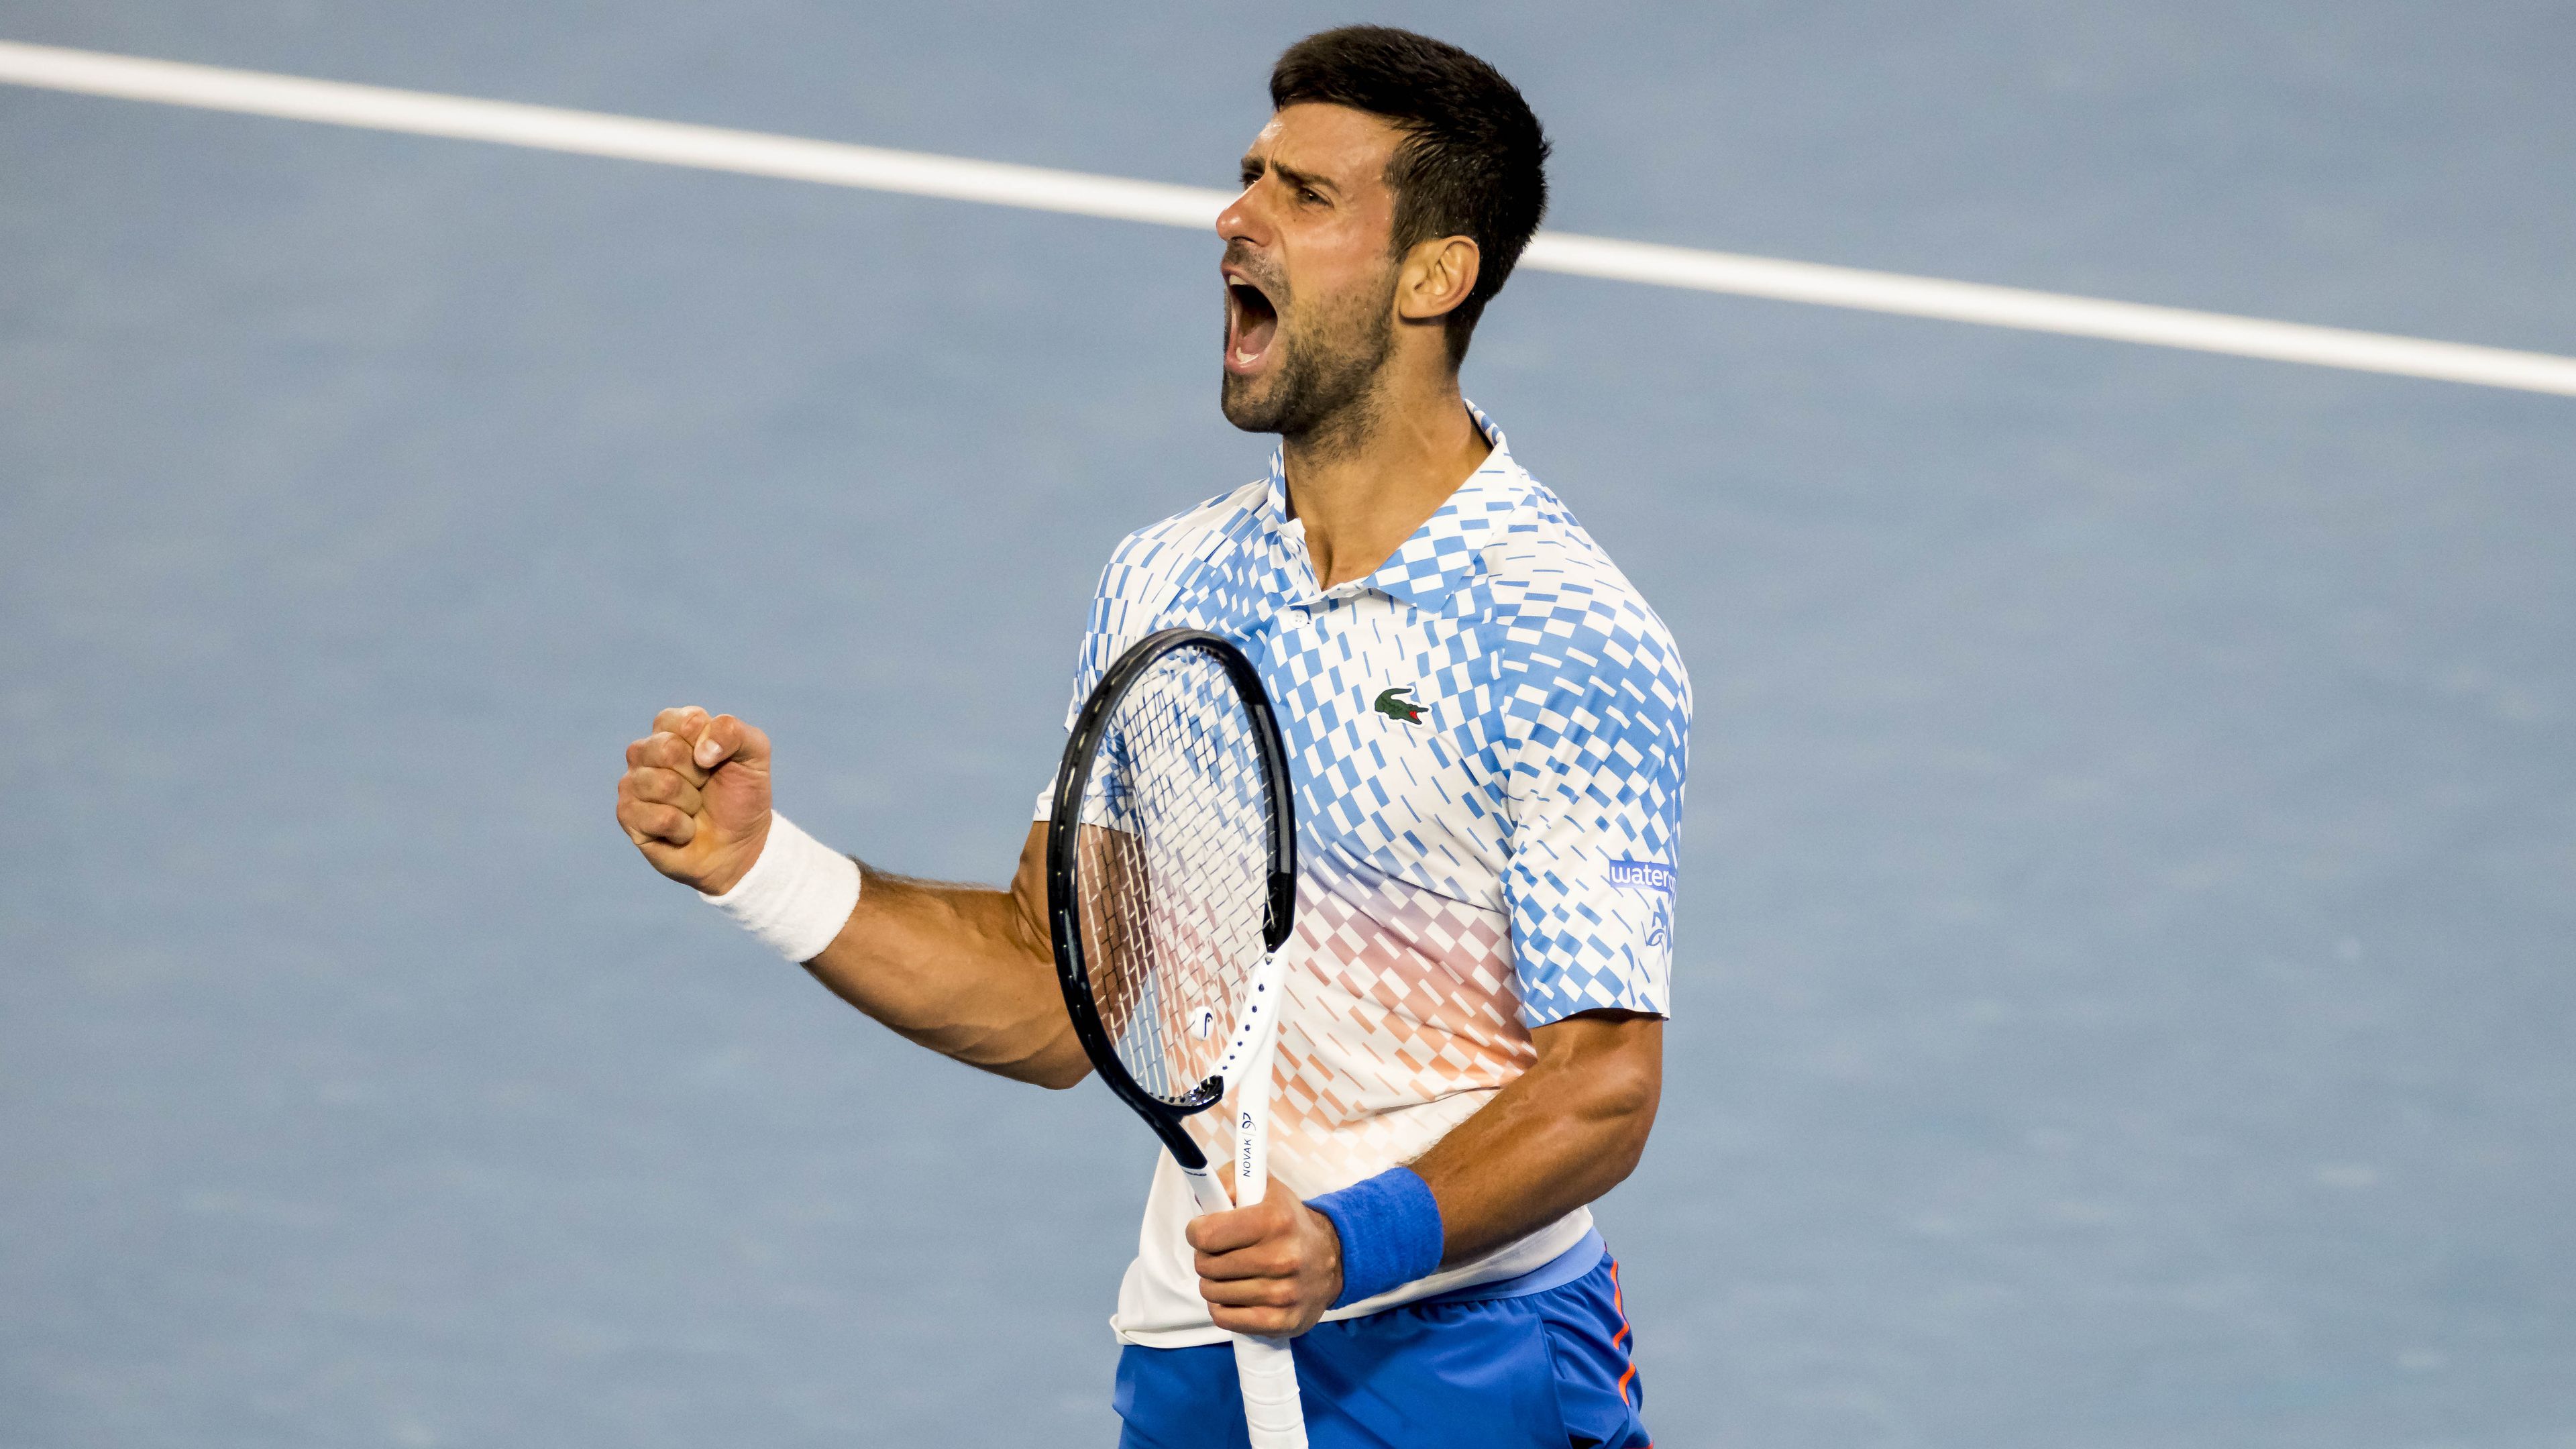 Australian Open 2023: Novak Djokovic, results, records, sends a message to his opponents